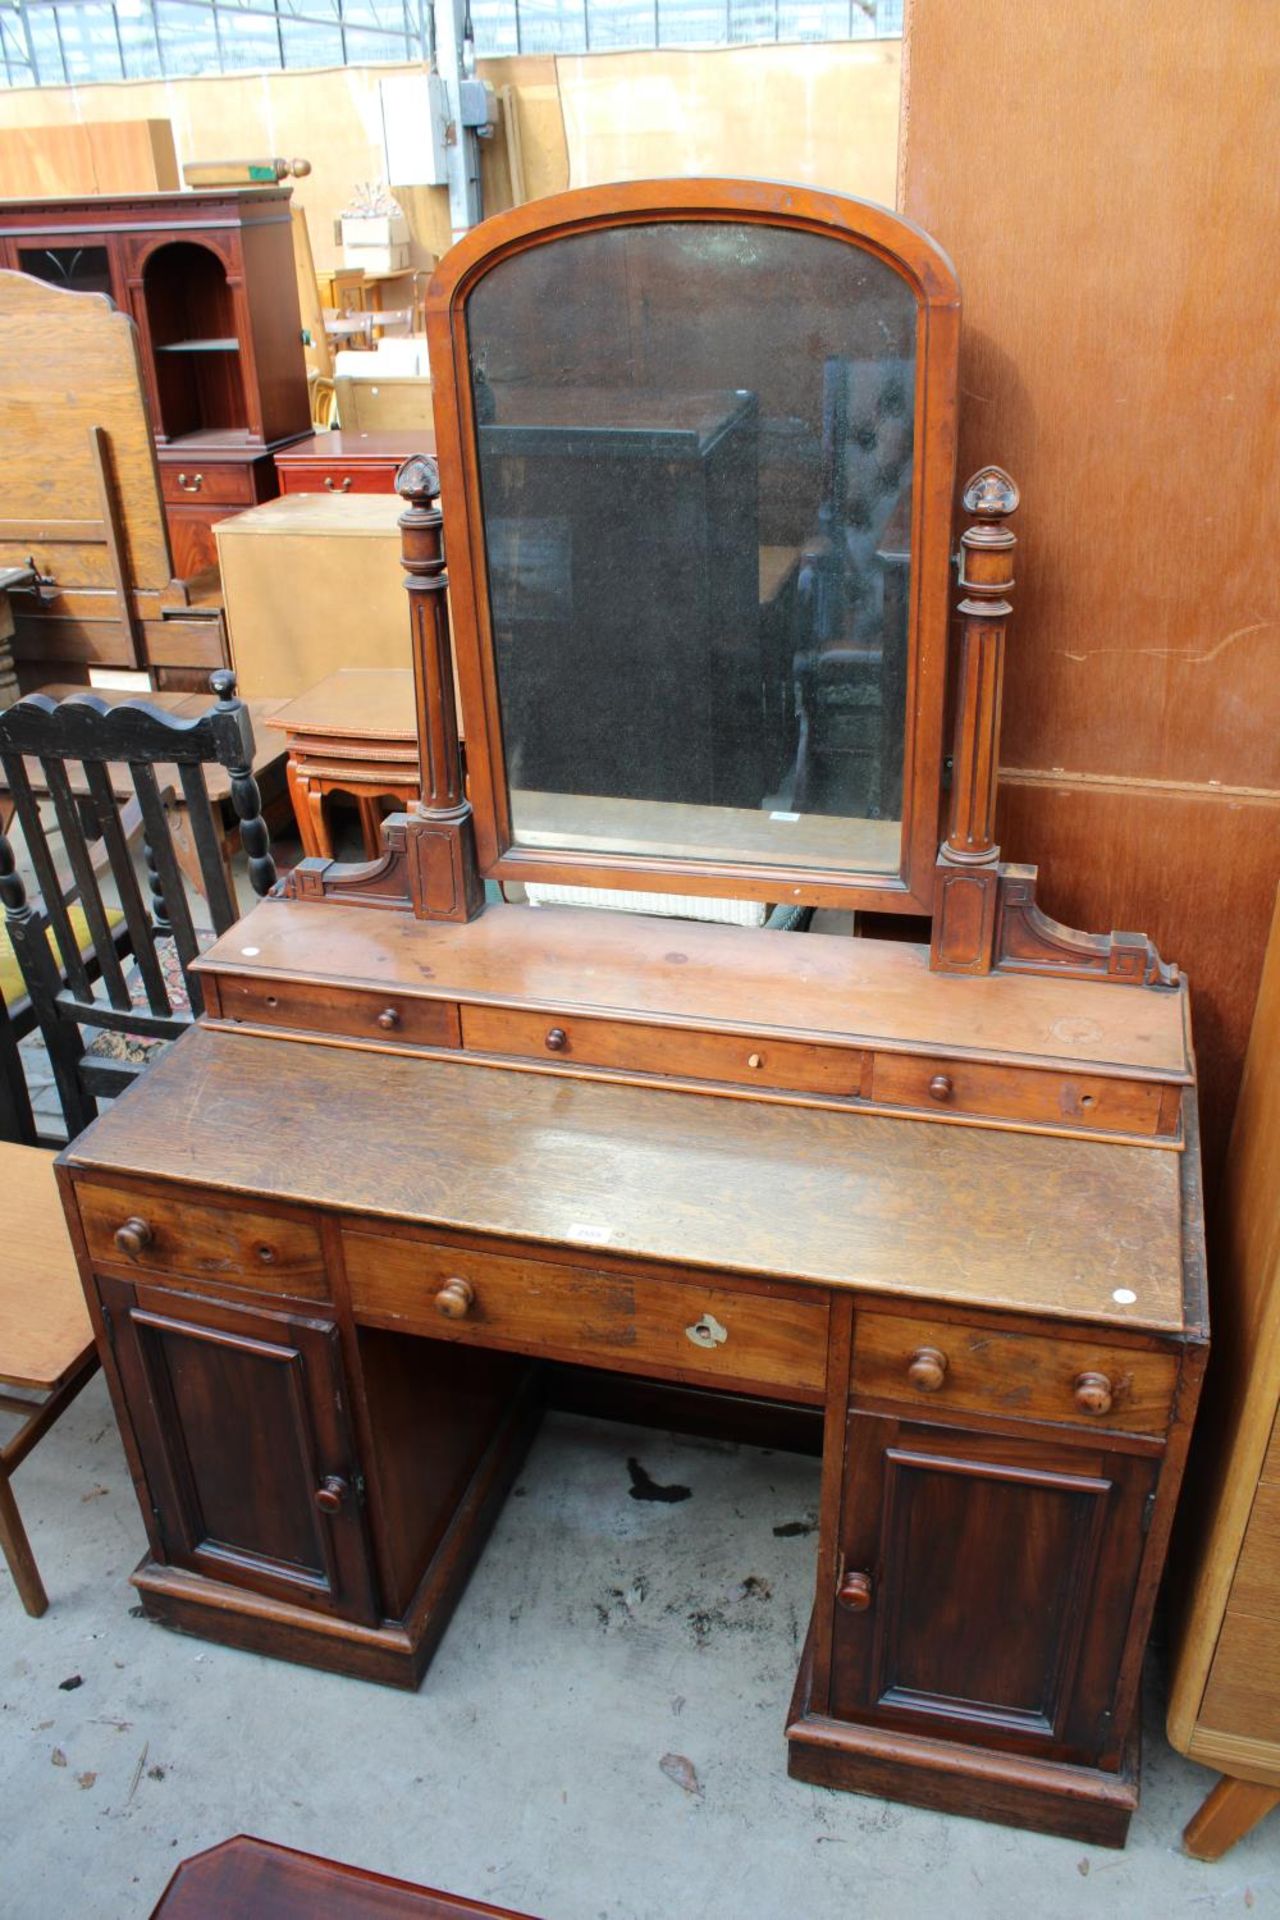 A VICTORIAN MAHOGANY KNEE-HOLE DRESSING TABLE WITH OAK TOP, 44" WIDE